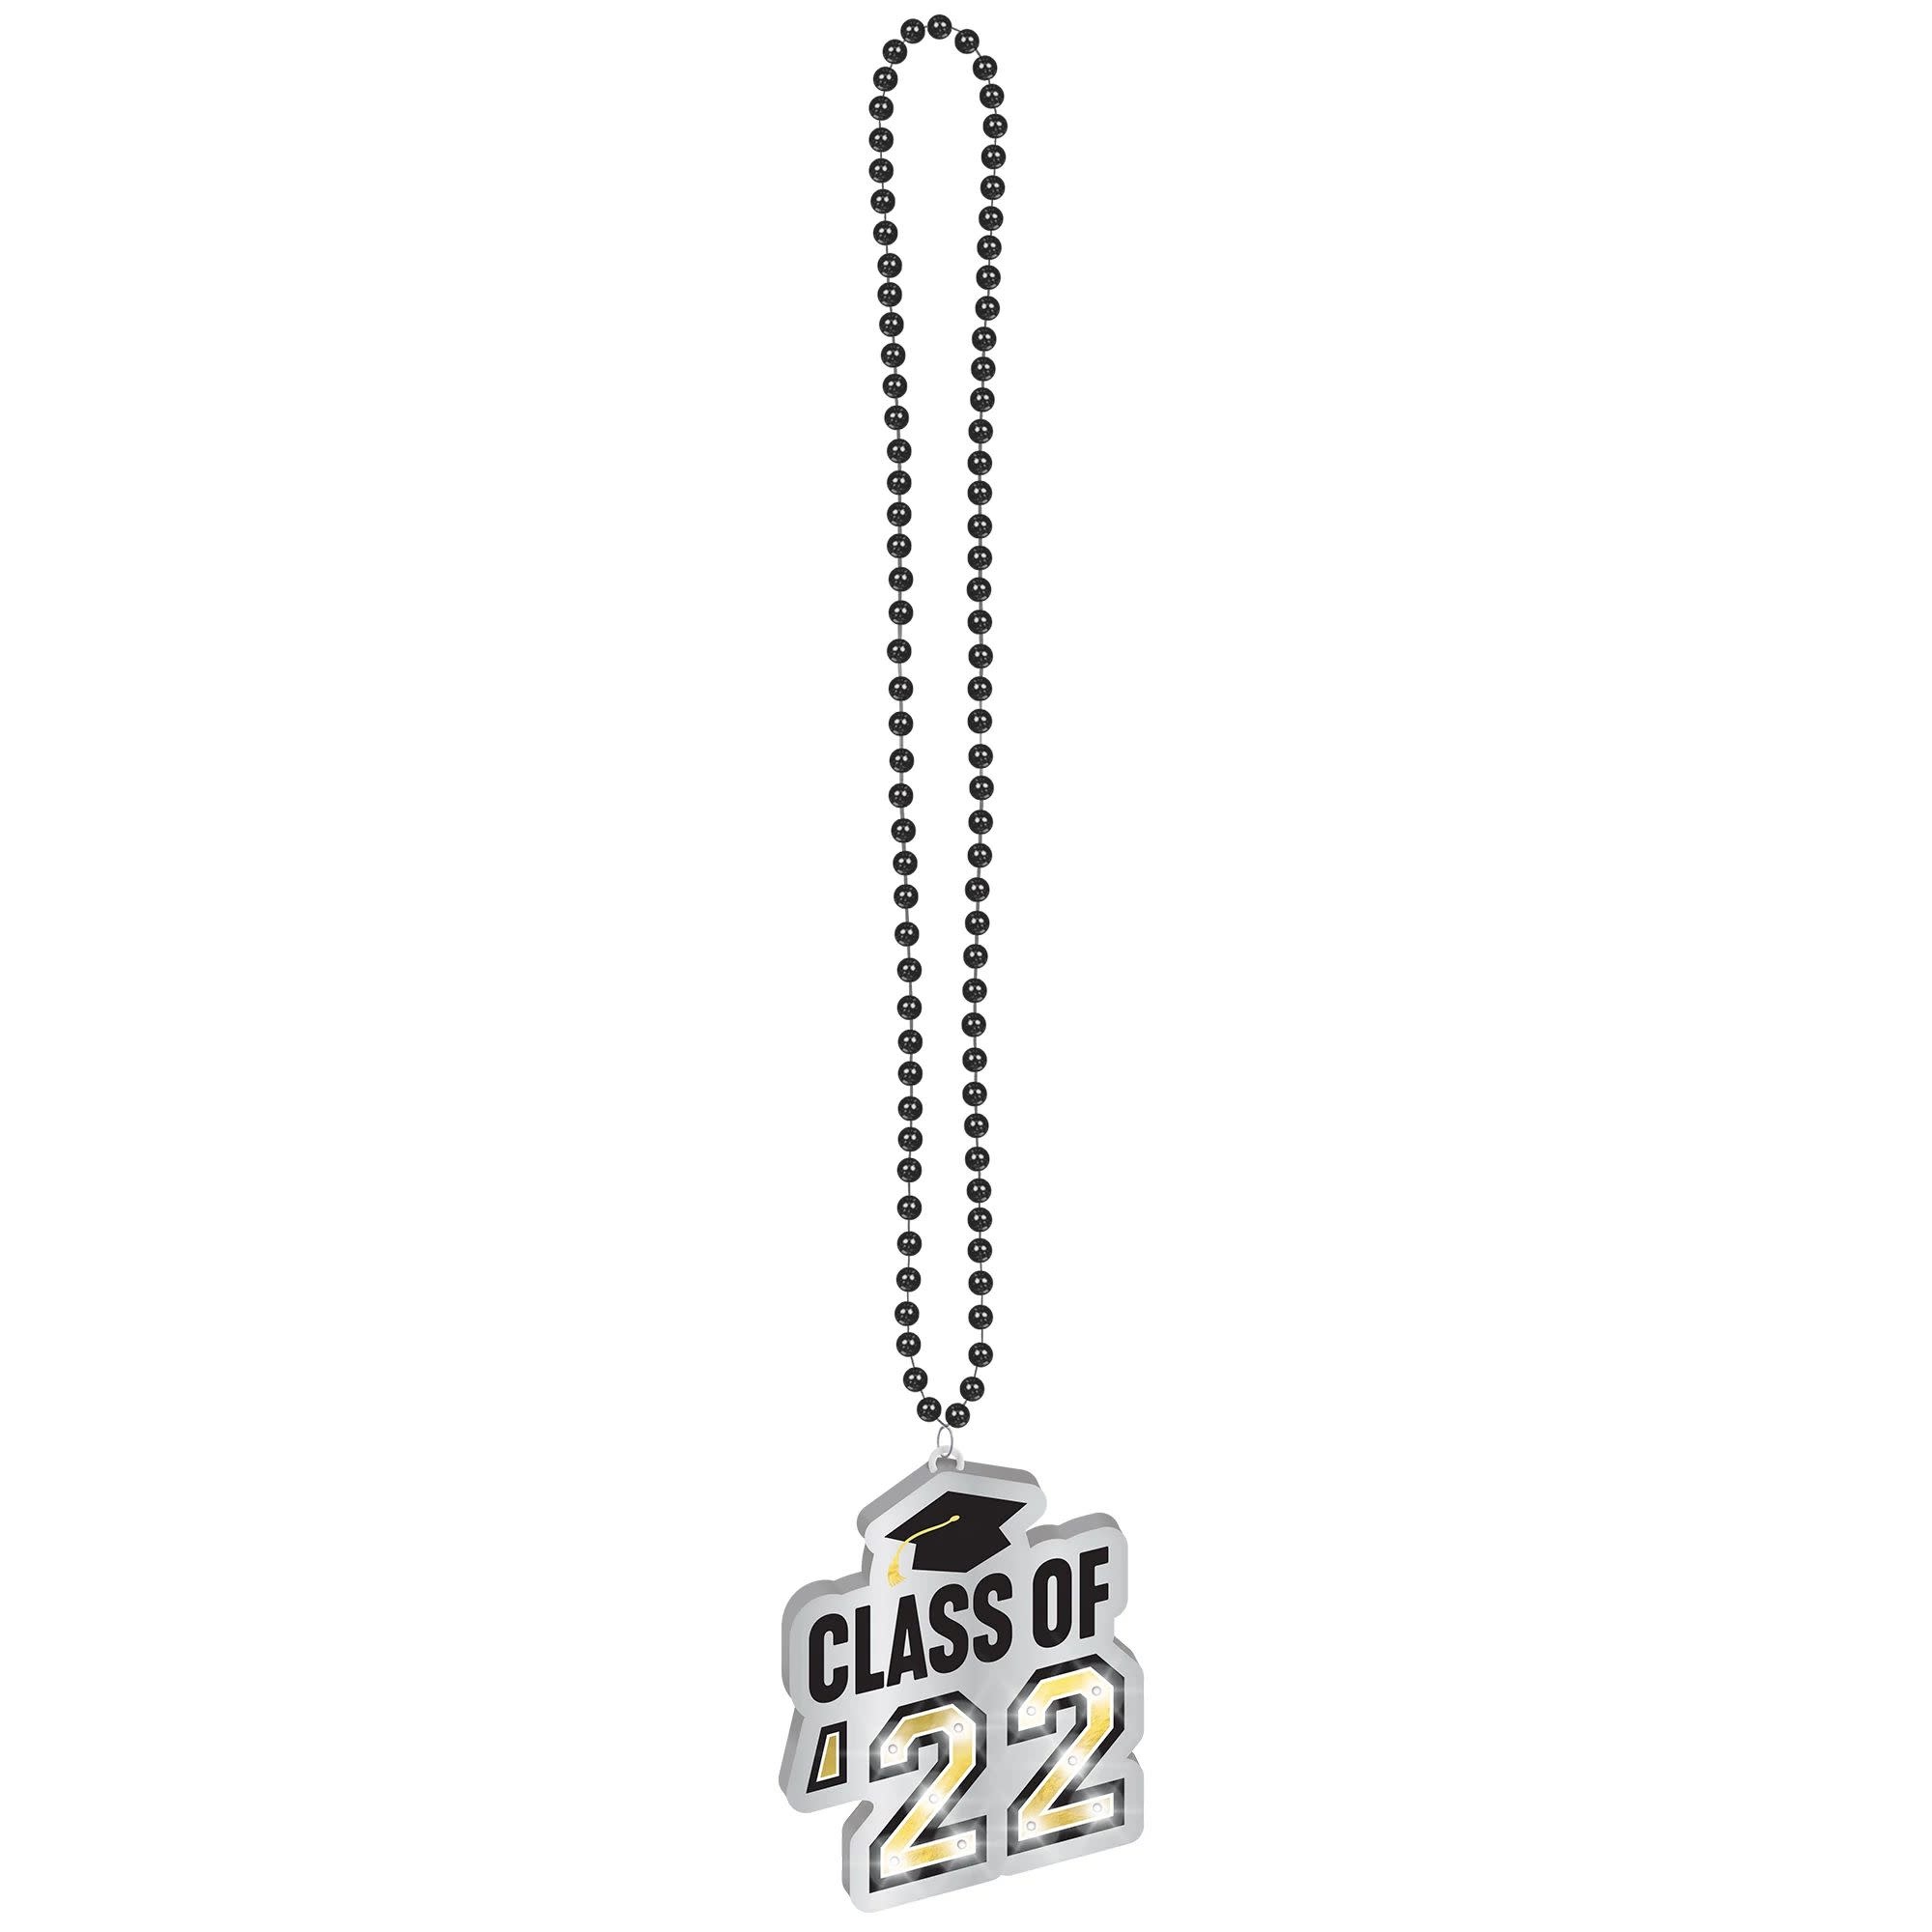 Class Of '22 Light Up Necklace